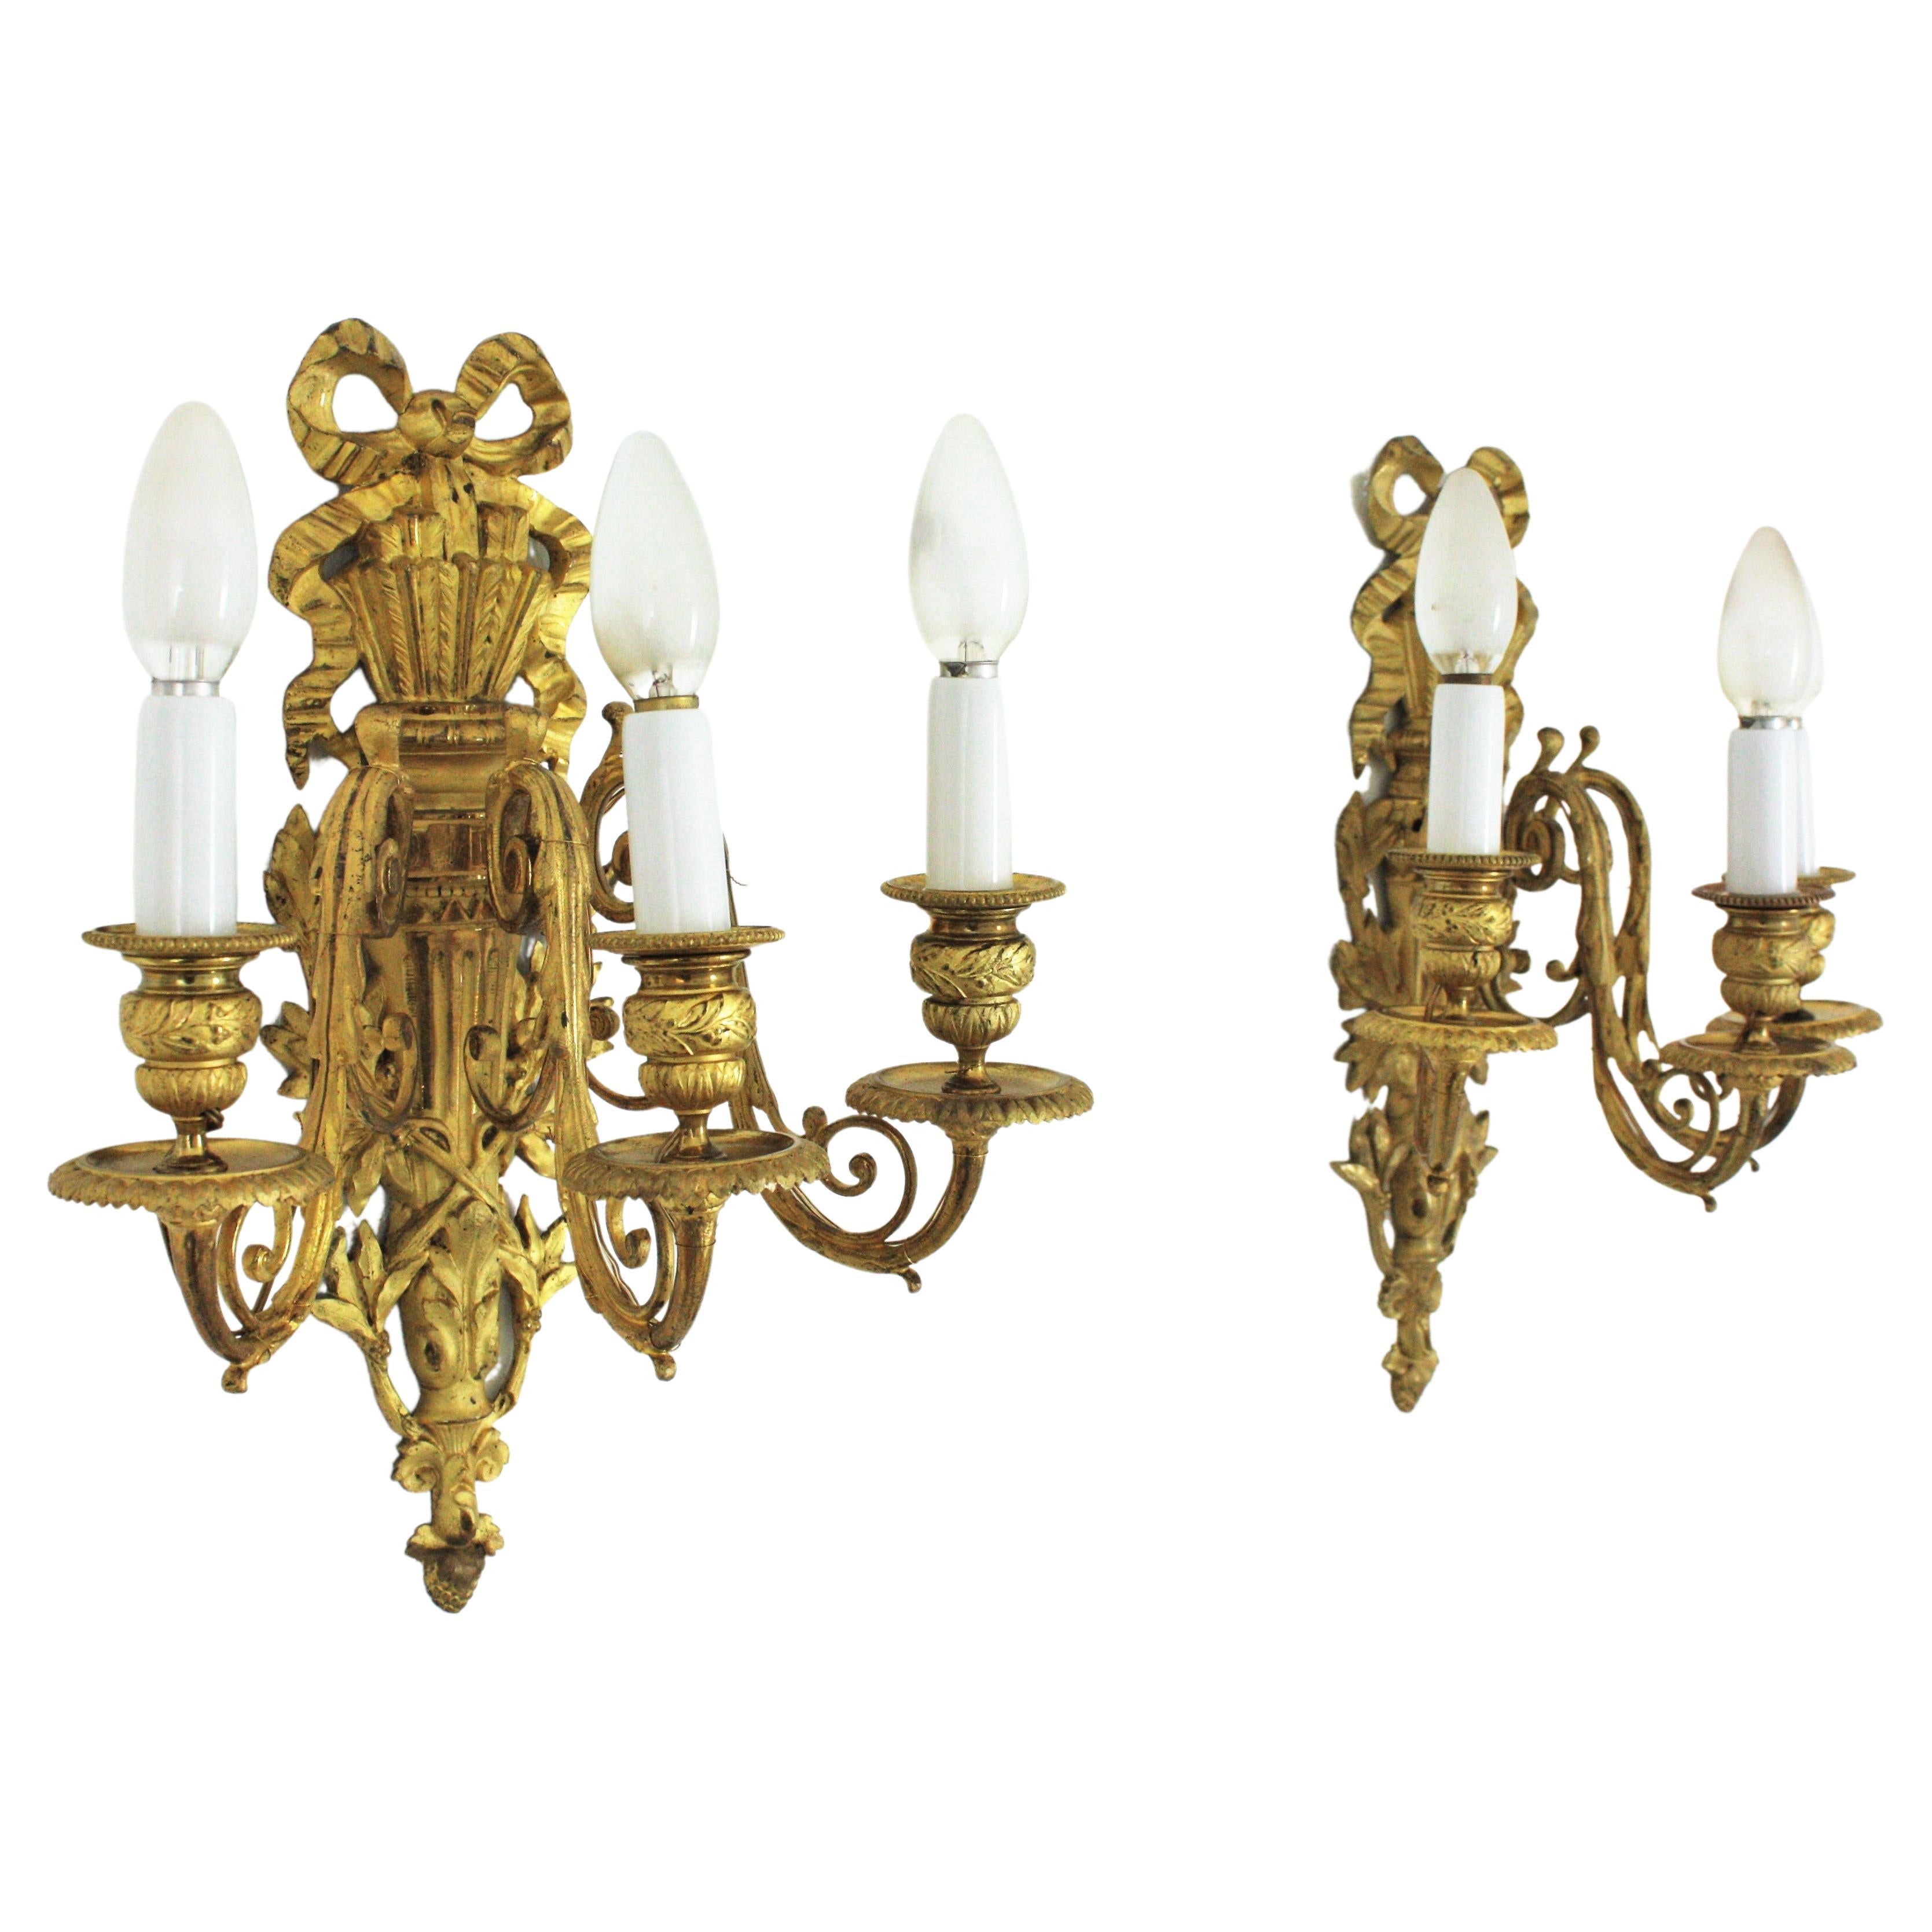 
Pair of Louis XVI style neoclassical wall sconces in ormolu and gilt bronze
France, 20th century
Measures: 
41 cm H x 30 cm W x 21 cm D // 16,14 in H x 11,81 in W x 8,26 in D
Each one weights 2,6 kg
On sale as a pair.

Exquisite pair of wall lights